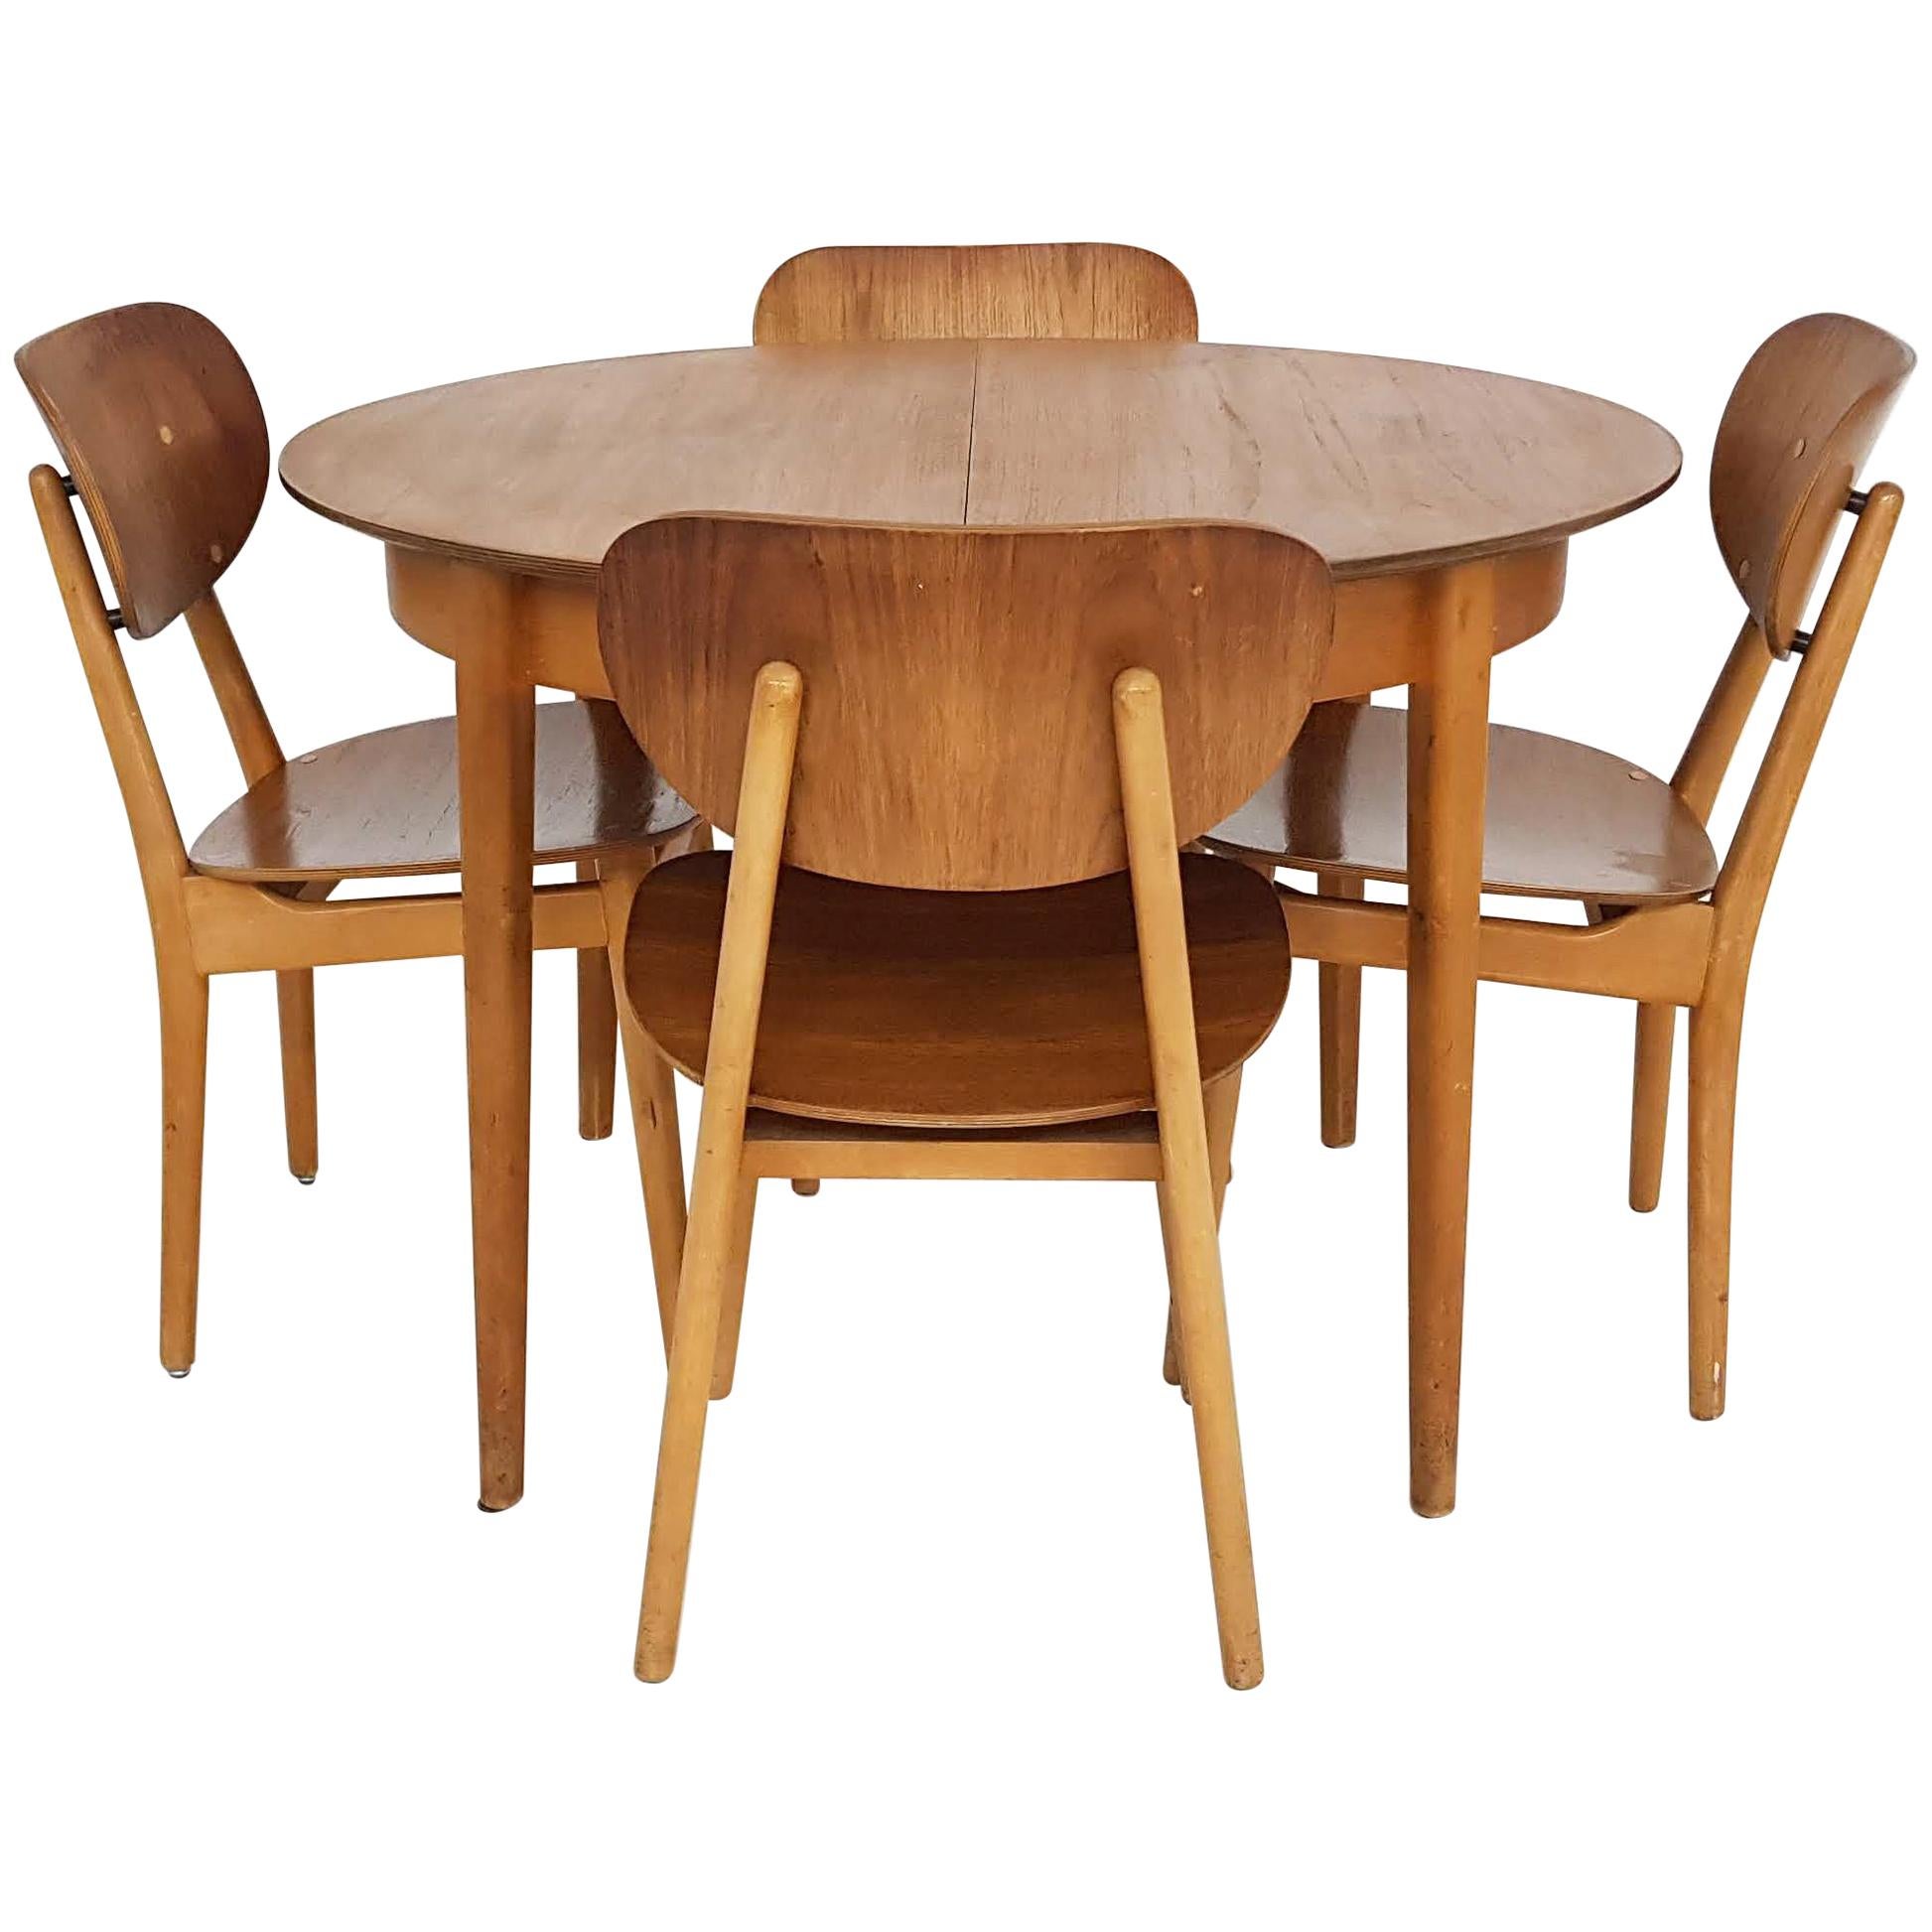 Dining Set with Table TB35 and Chair SB11, Cees Braakman for Pastoe, Dutch 1950s